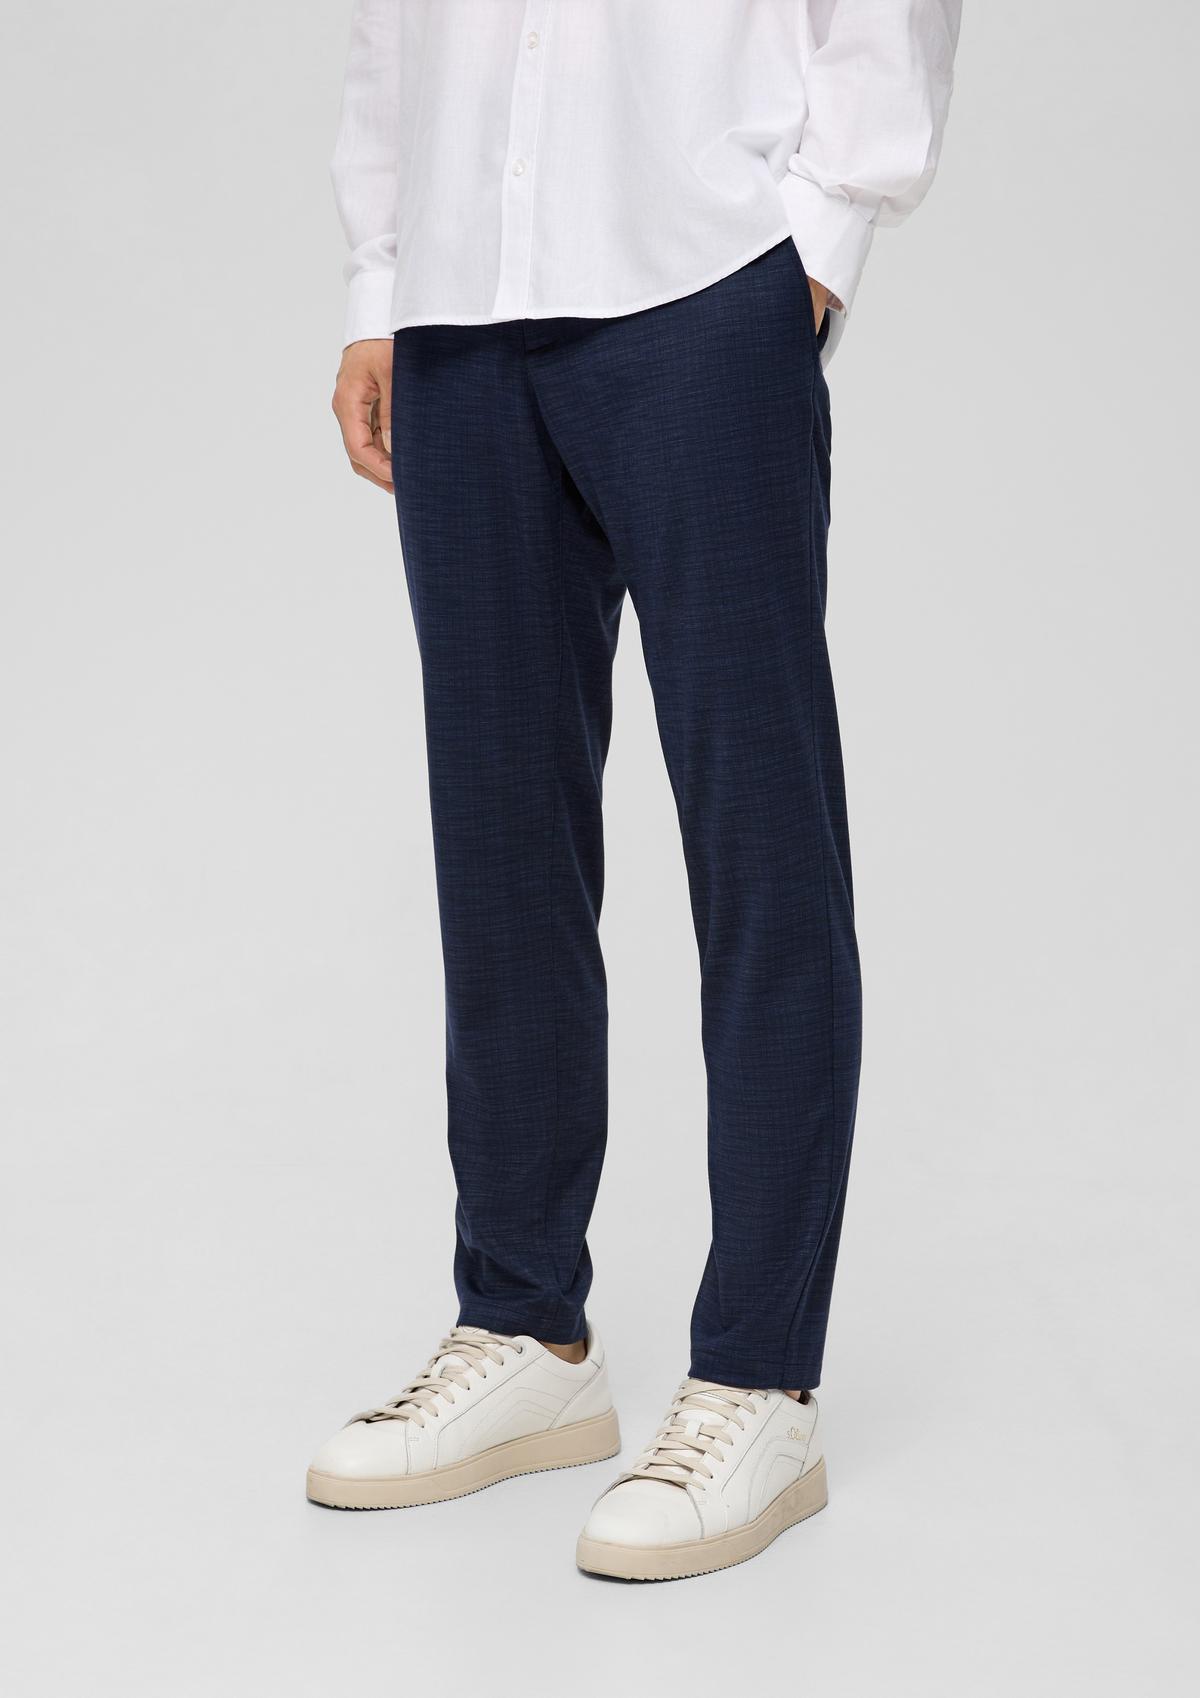 Slim fit: trousers with a tapered leg